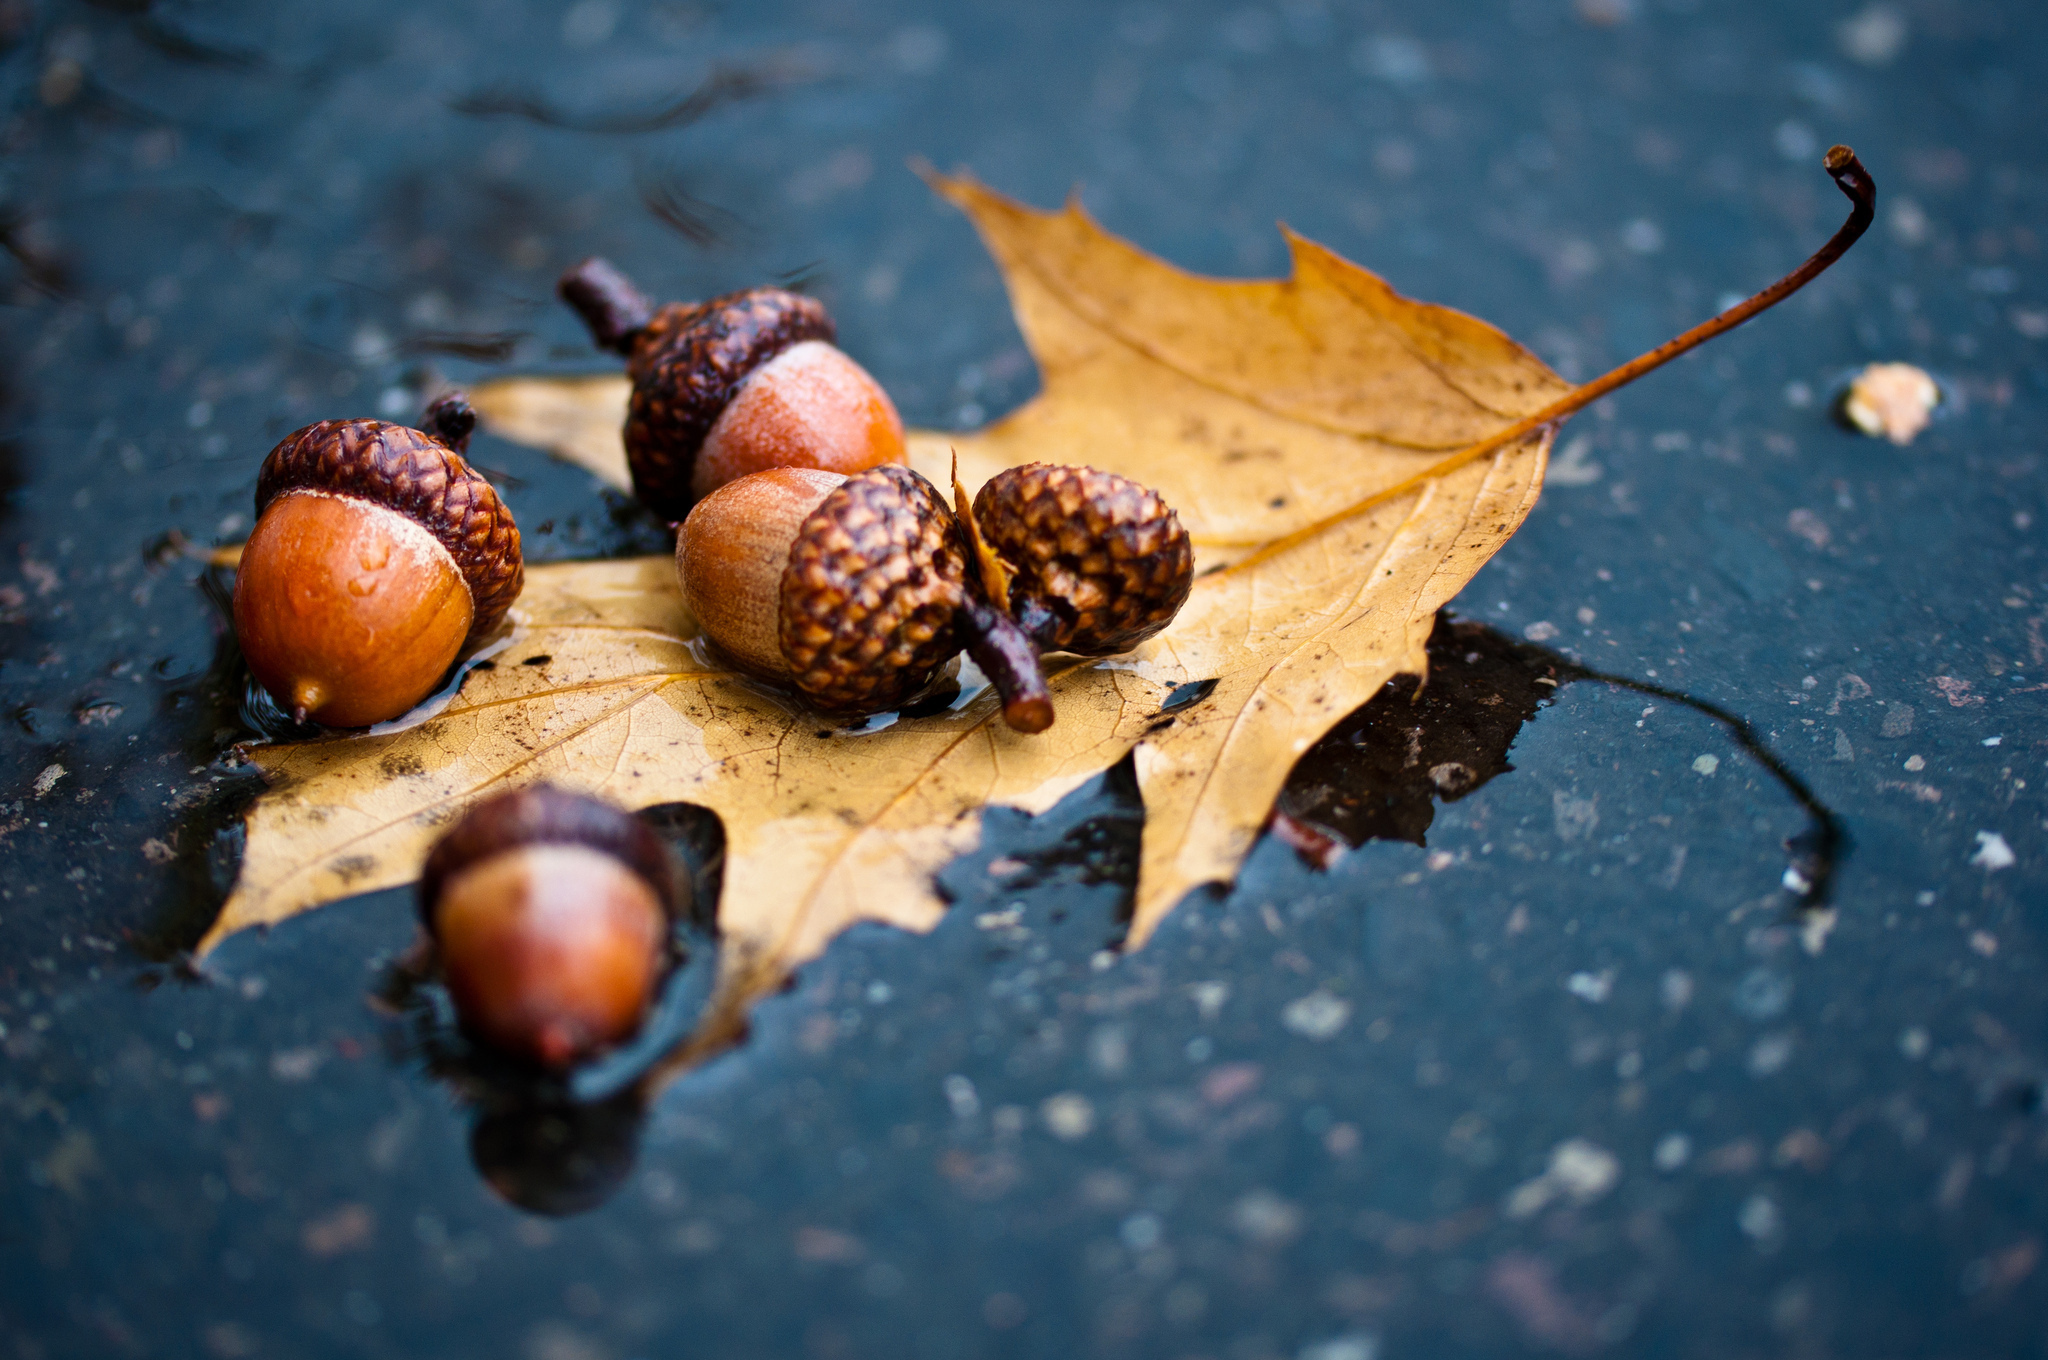 Leaves, Water, acorn, Oak, Autumn leaves wallpapers and images